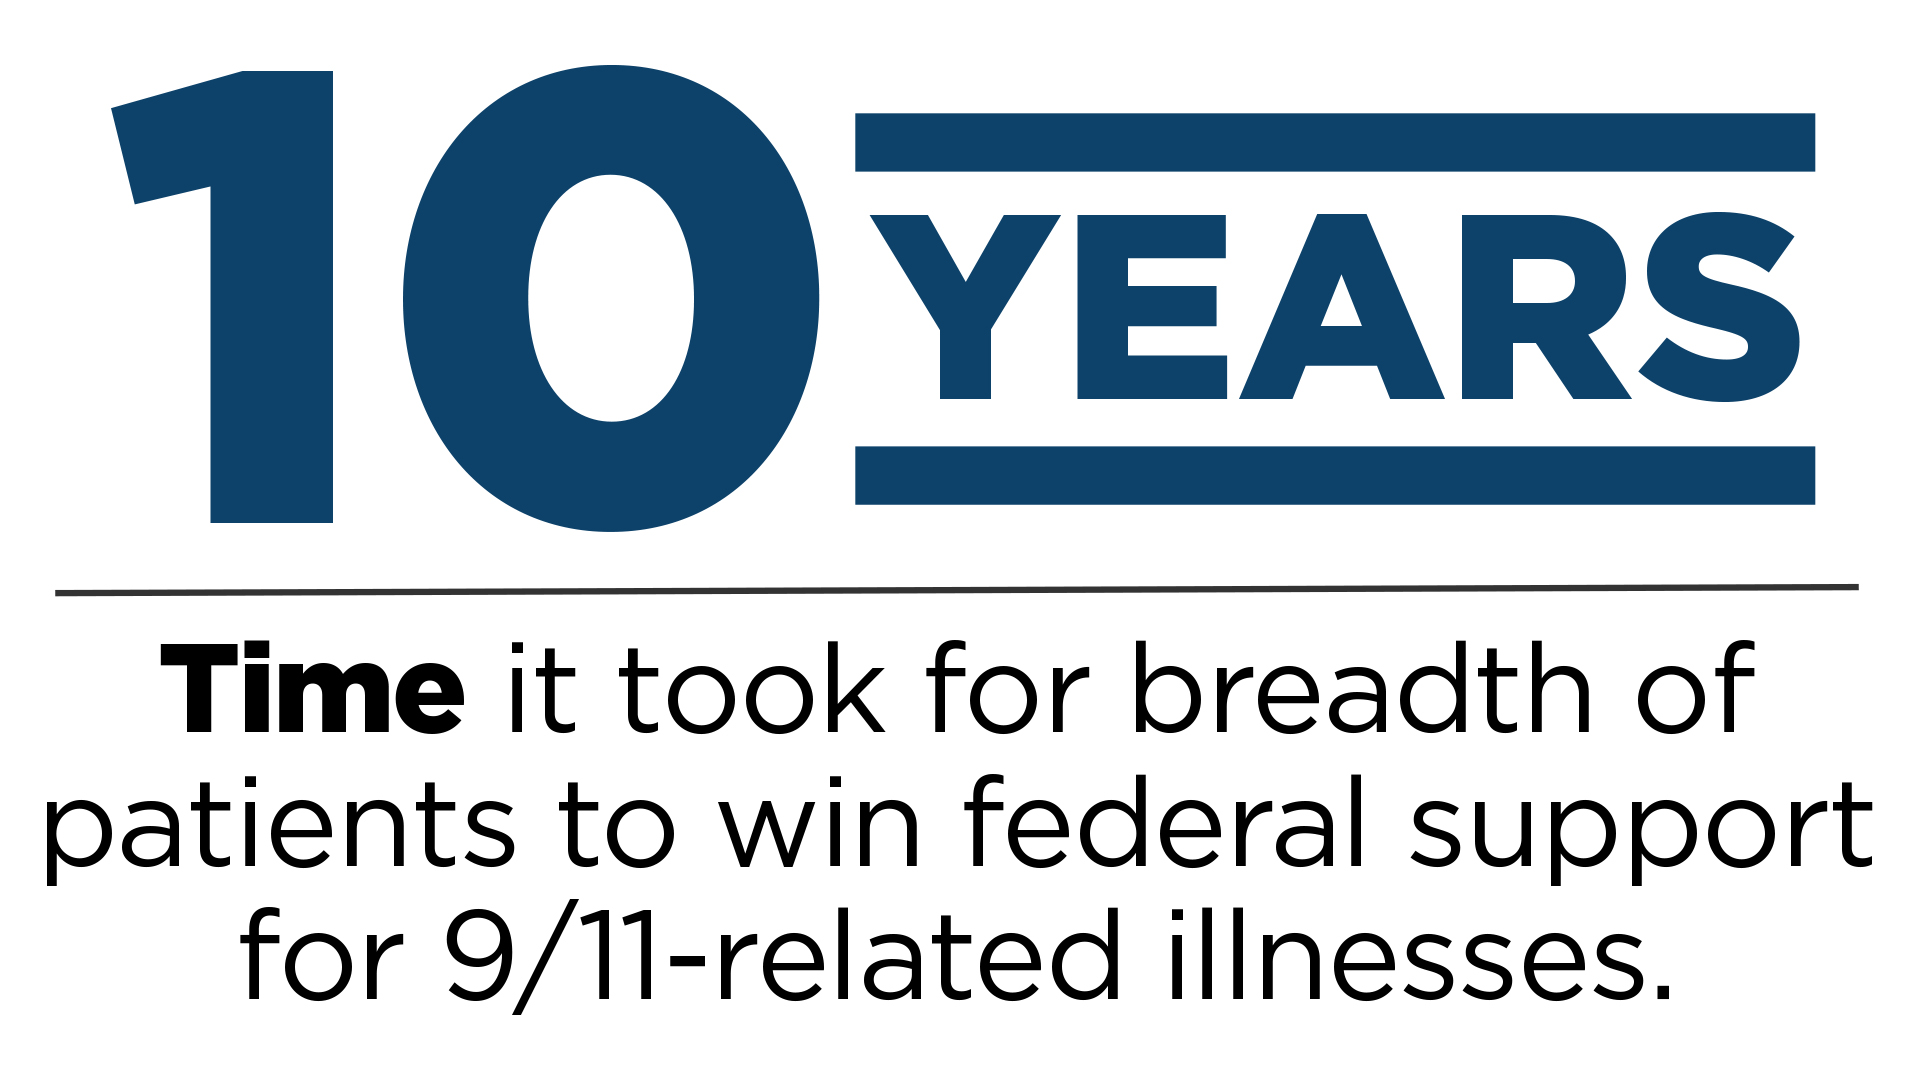 Infographic that reads "10 years: Time it took for breadth of patients to win federal support for 9/11-related illnesses."